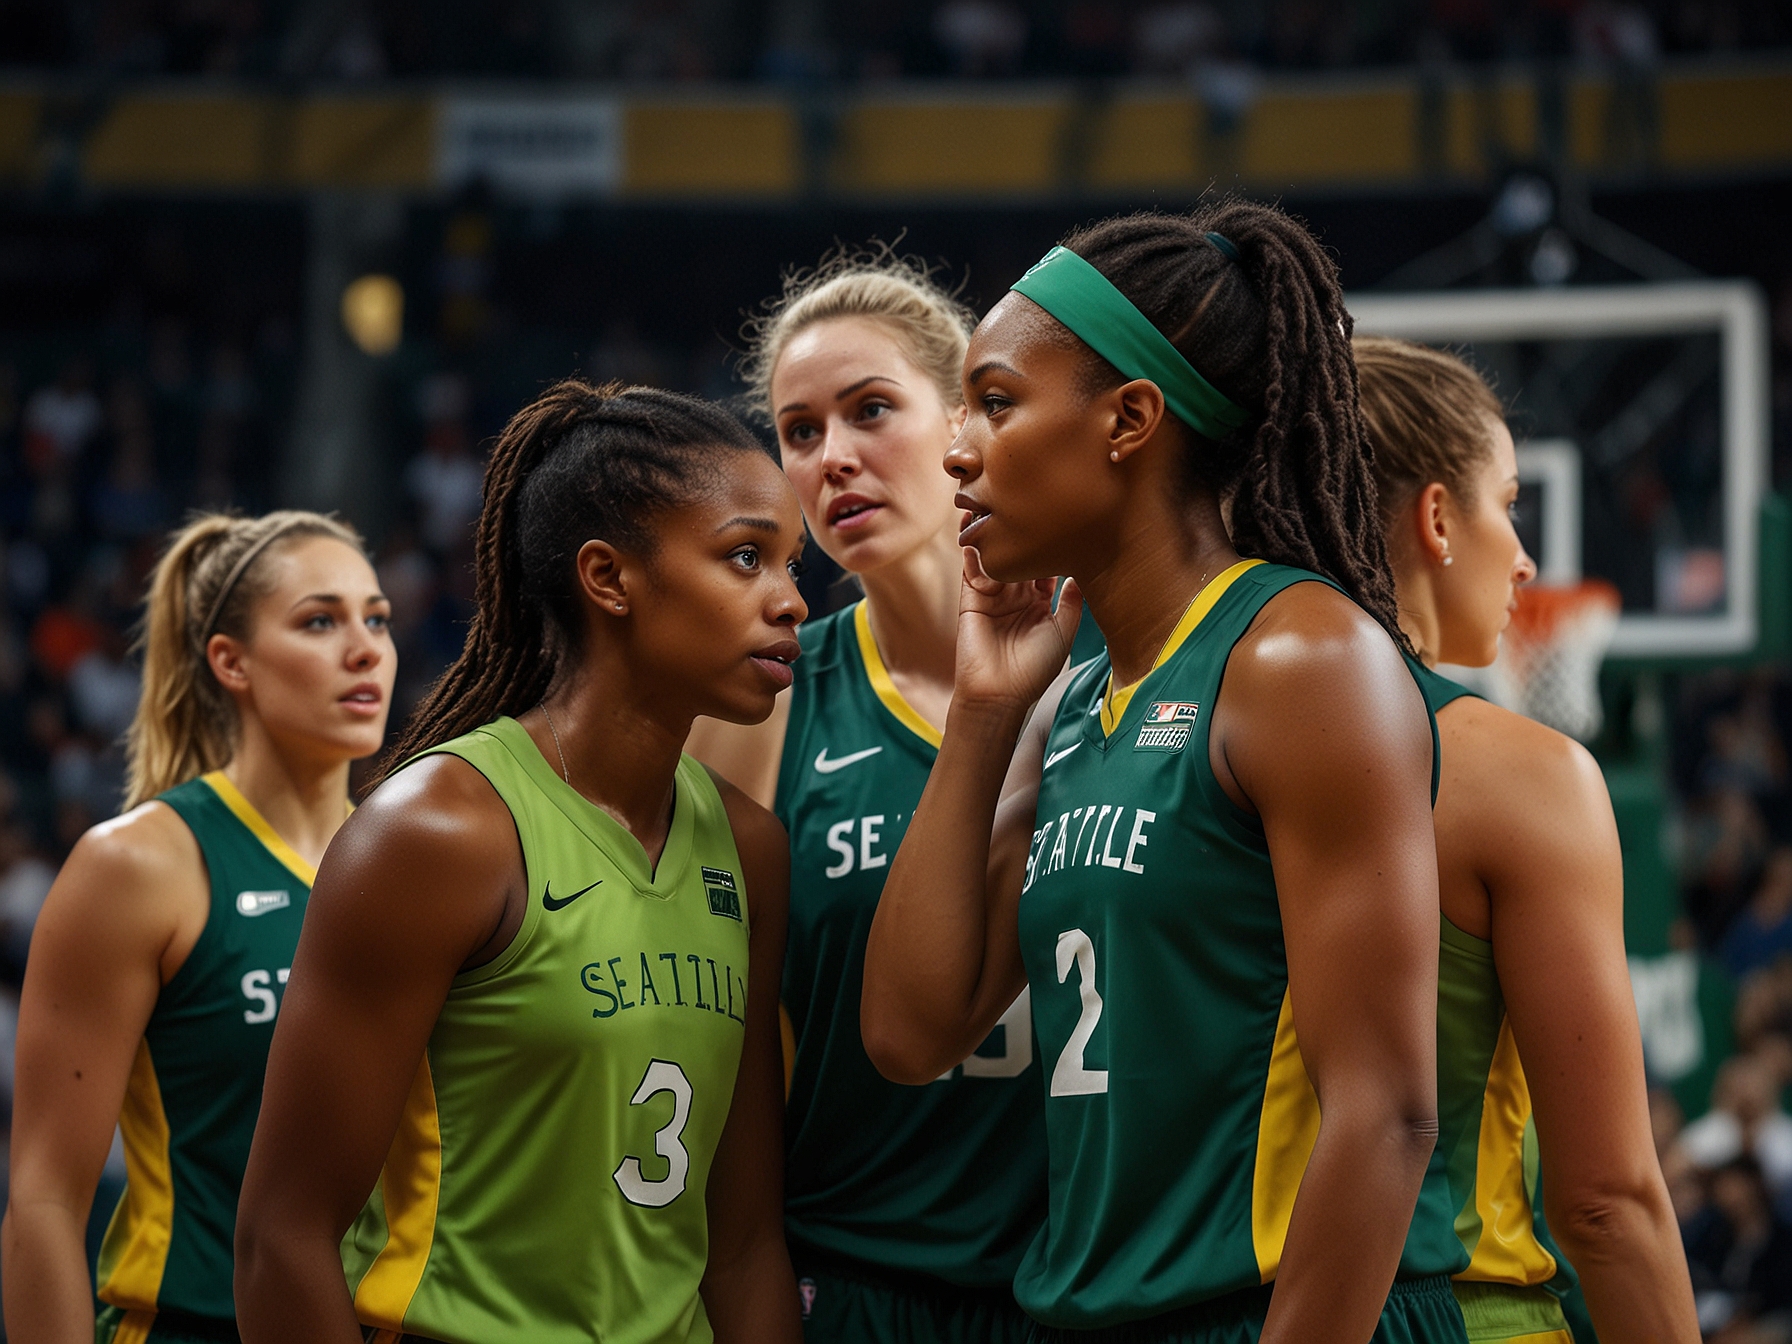 Seattle Storm players huddle together for a strategic discussion before their impending game against the Connecticut Sun. Their expressions reflect determination and readiness for the significant matchup.